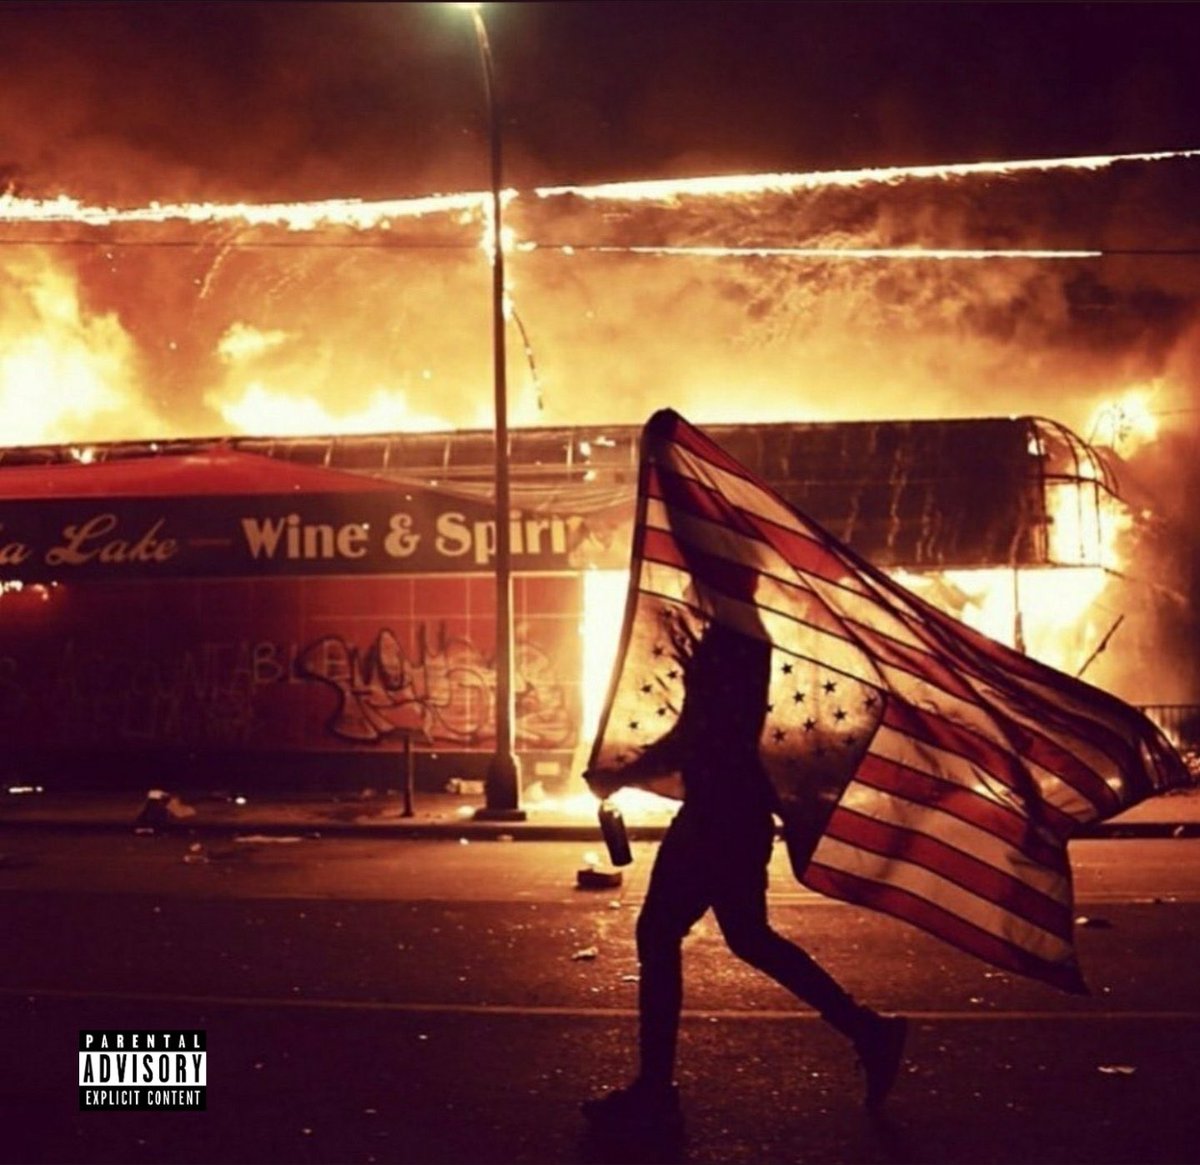 these protests have created some powerful pictures and they need to be used as album covers expeditiously